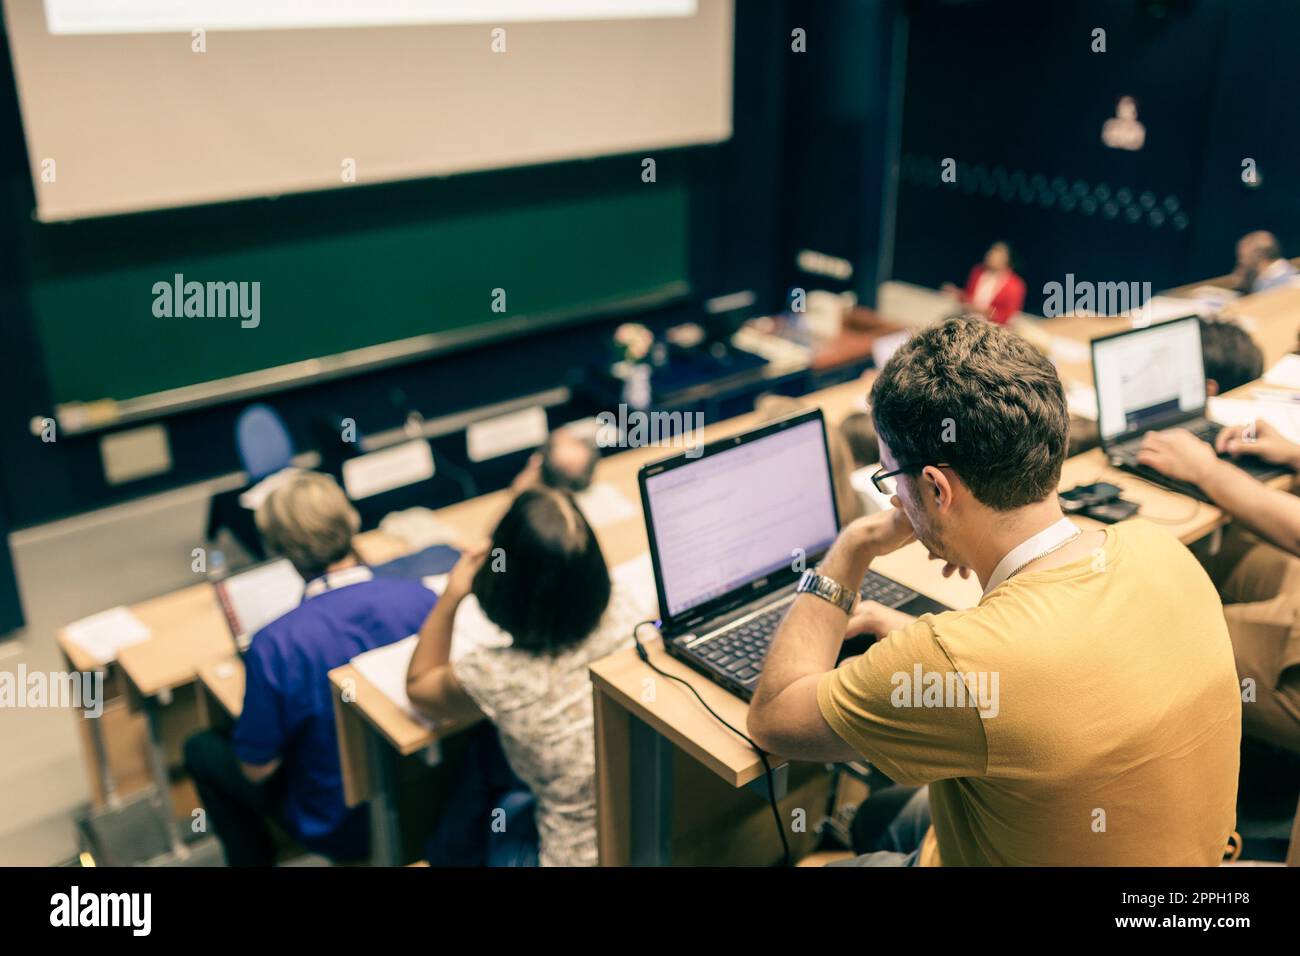 Workshop at university. Rear view of students sitting and listening in lecture hall doing practical tasks on their laptops Stock Photo